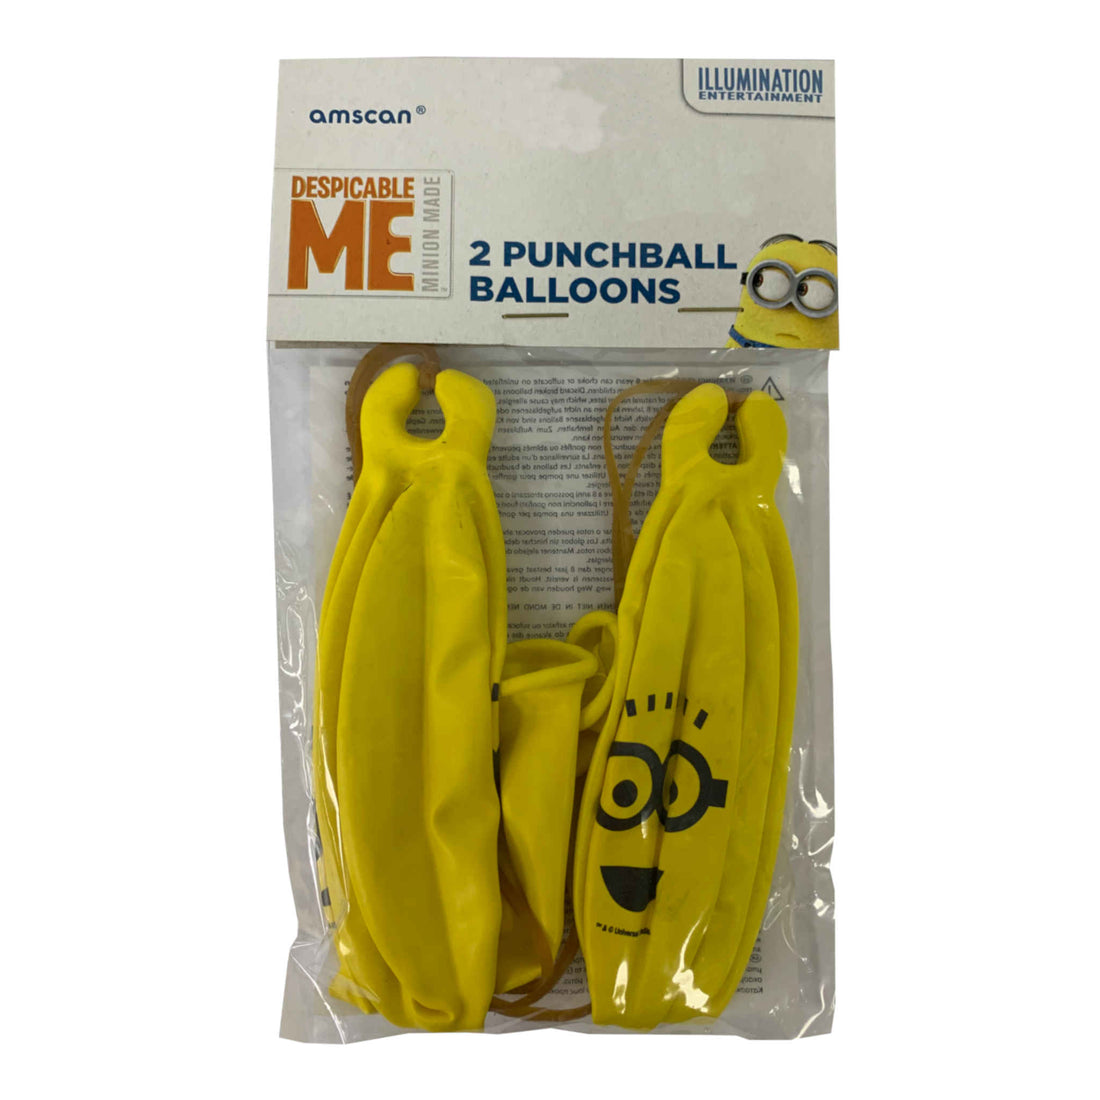 Despicable Me Punchball Balloons | 2 Pack